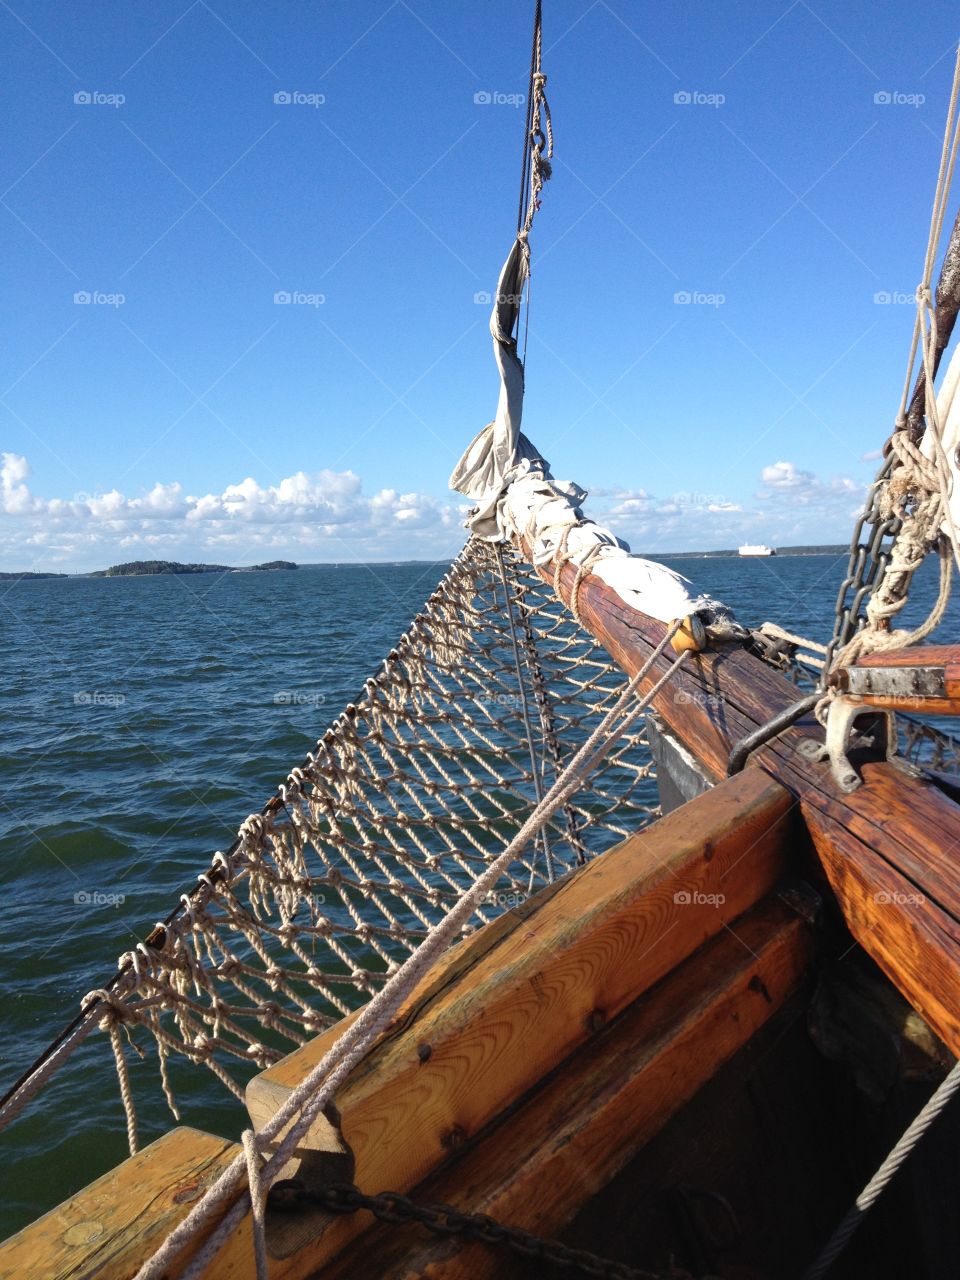 Towards the horison. A bowsprit of the sail ship and the sea.